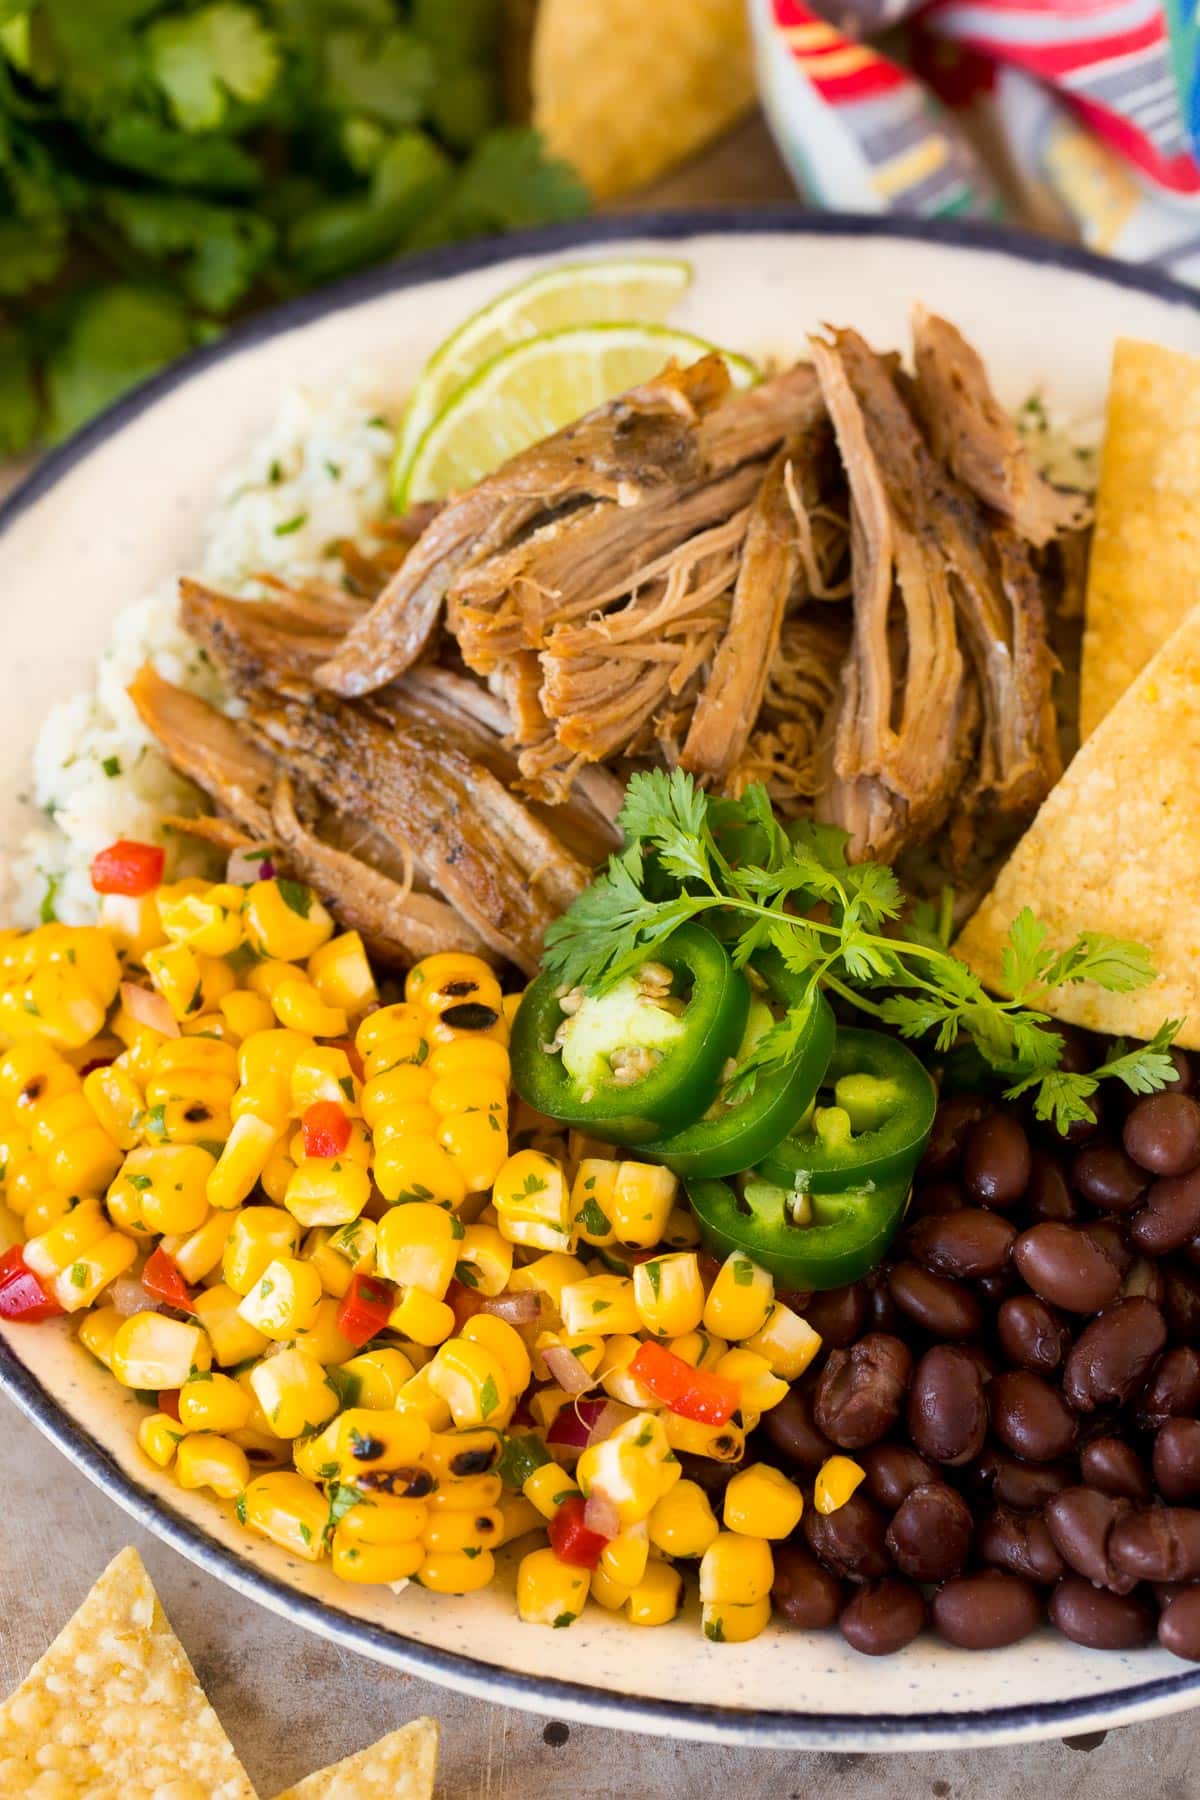 Corn salsa on a plate with rice, beans and pork.